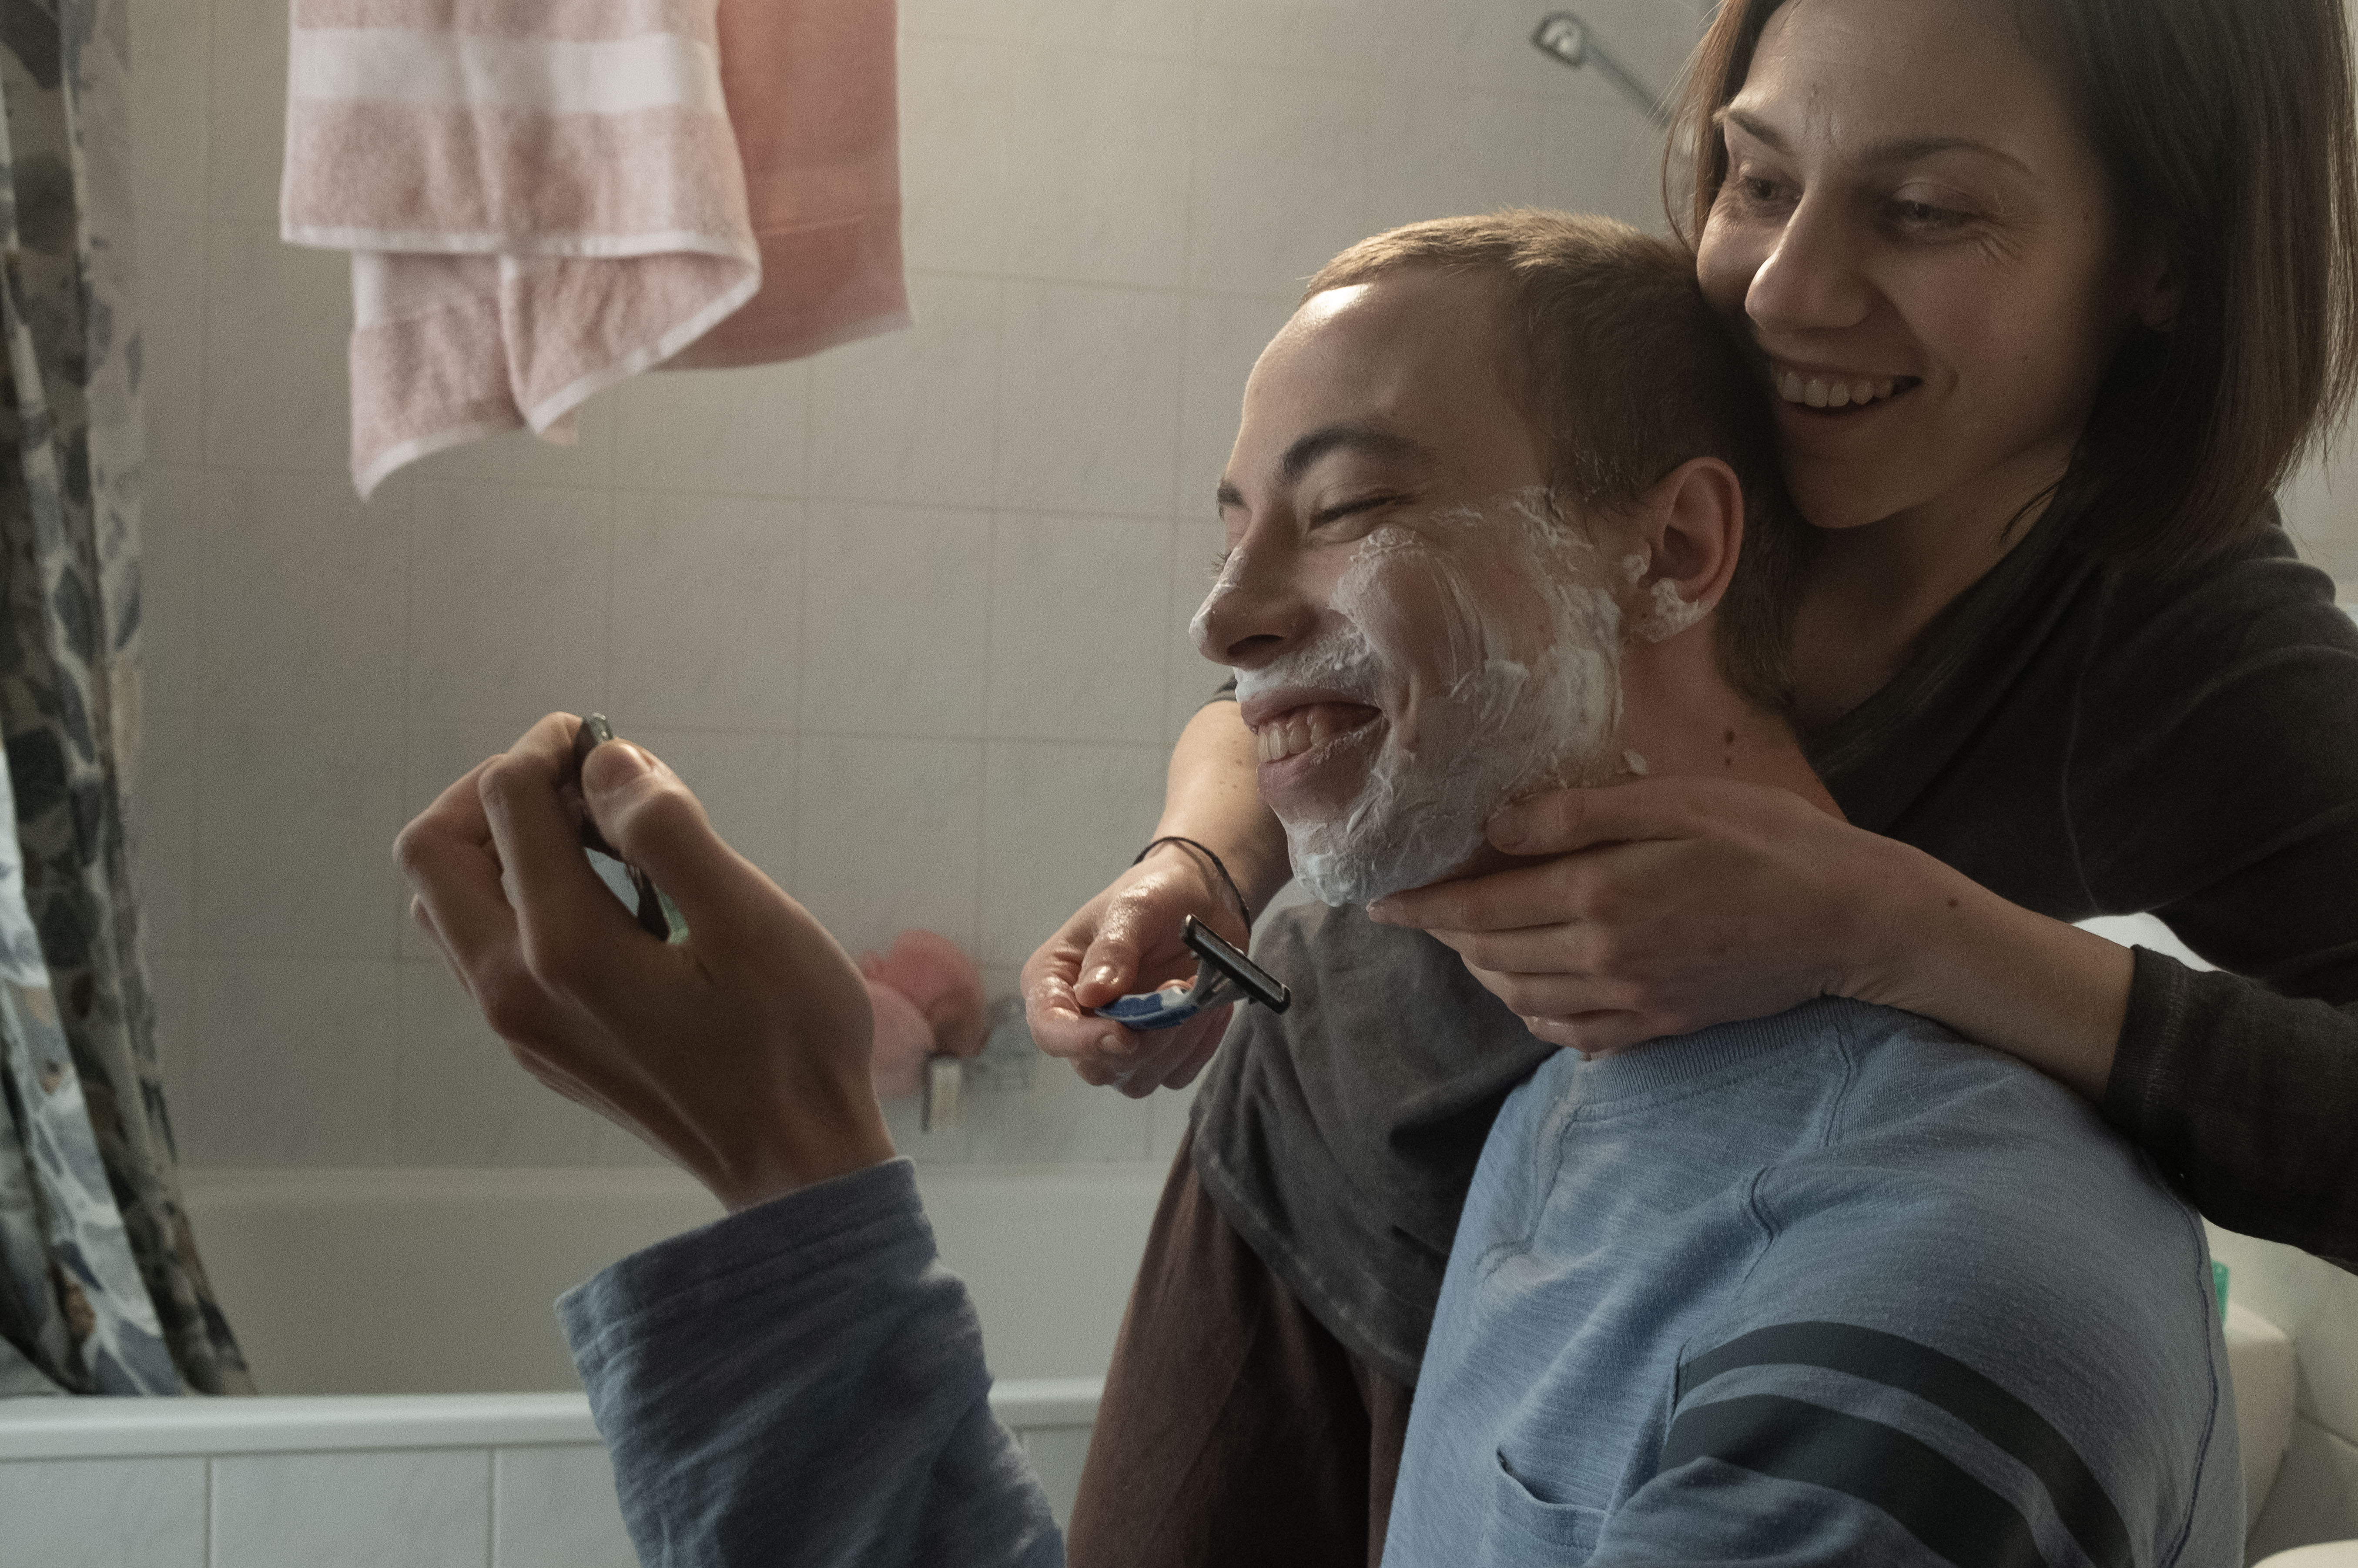 Film still of a smiling mother and her teenage son. The mother shaves her son’s face in the bathroom.